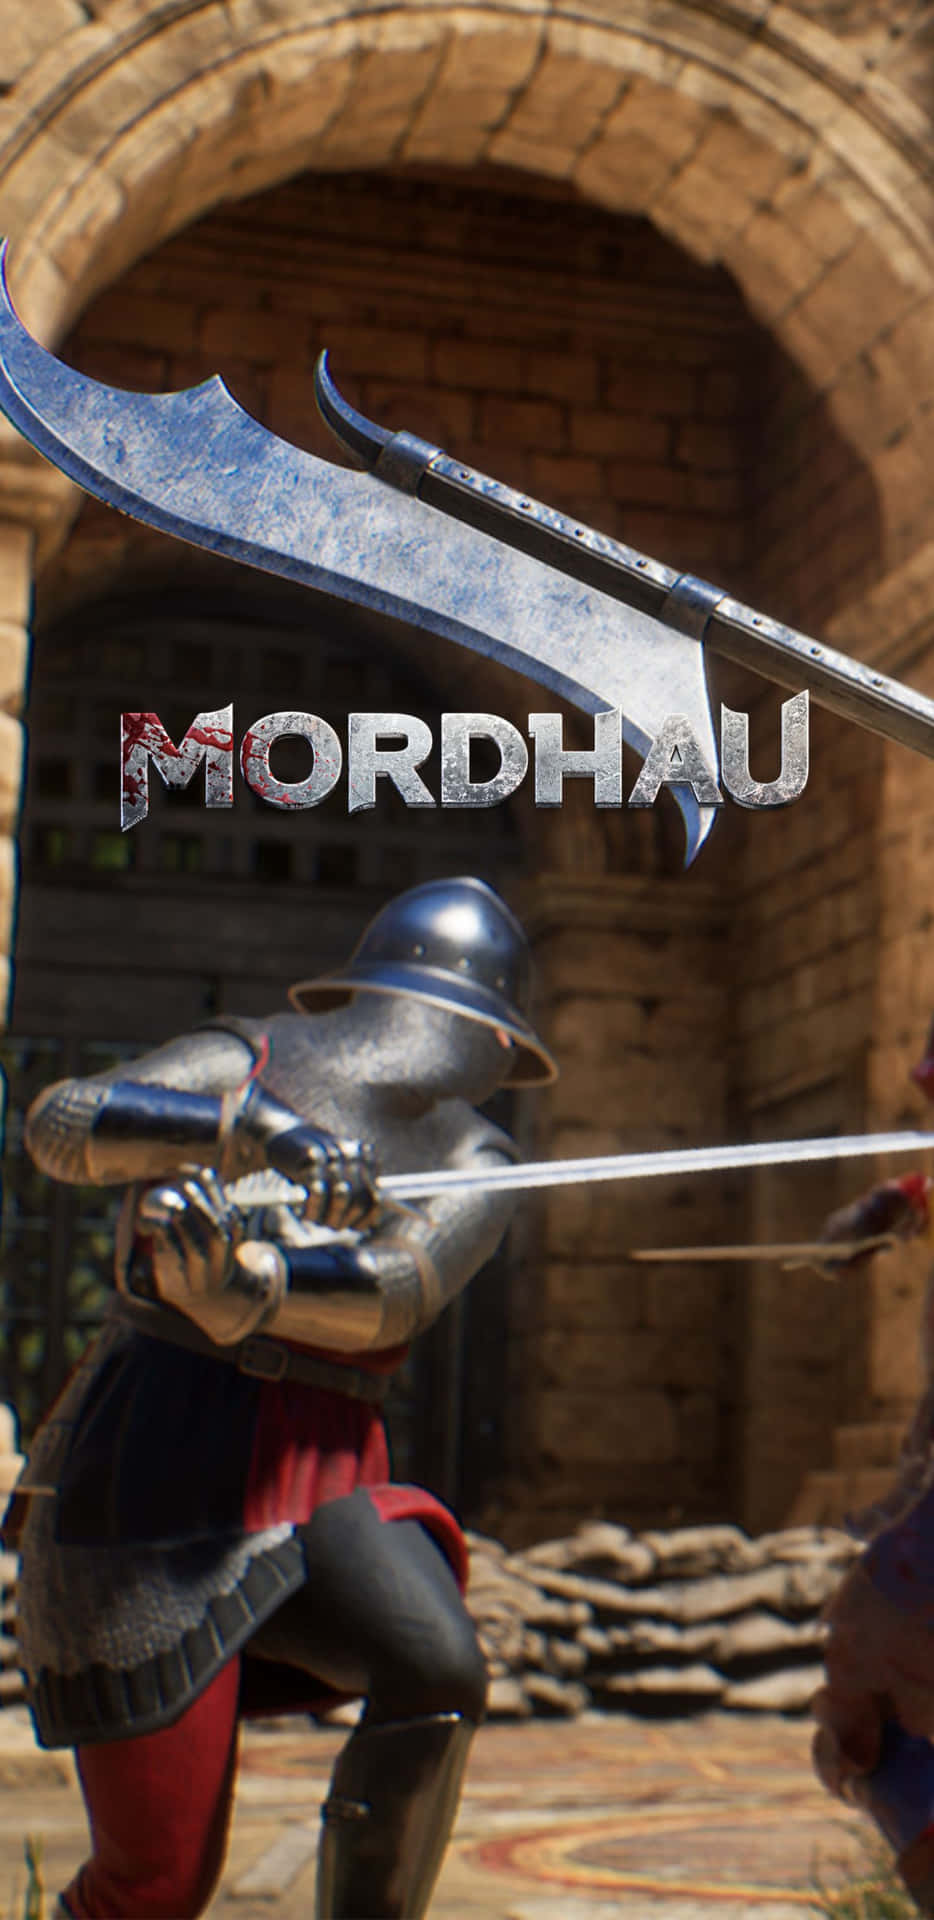 Two Men Are Fighting In A Game With The Word Mordha